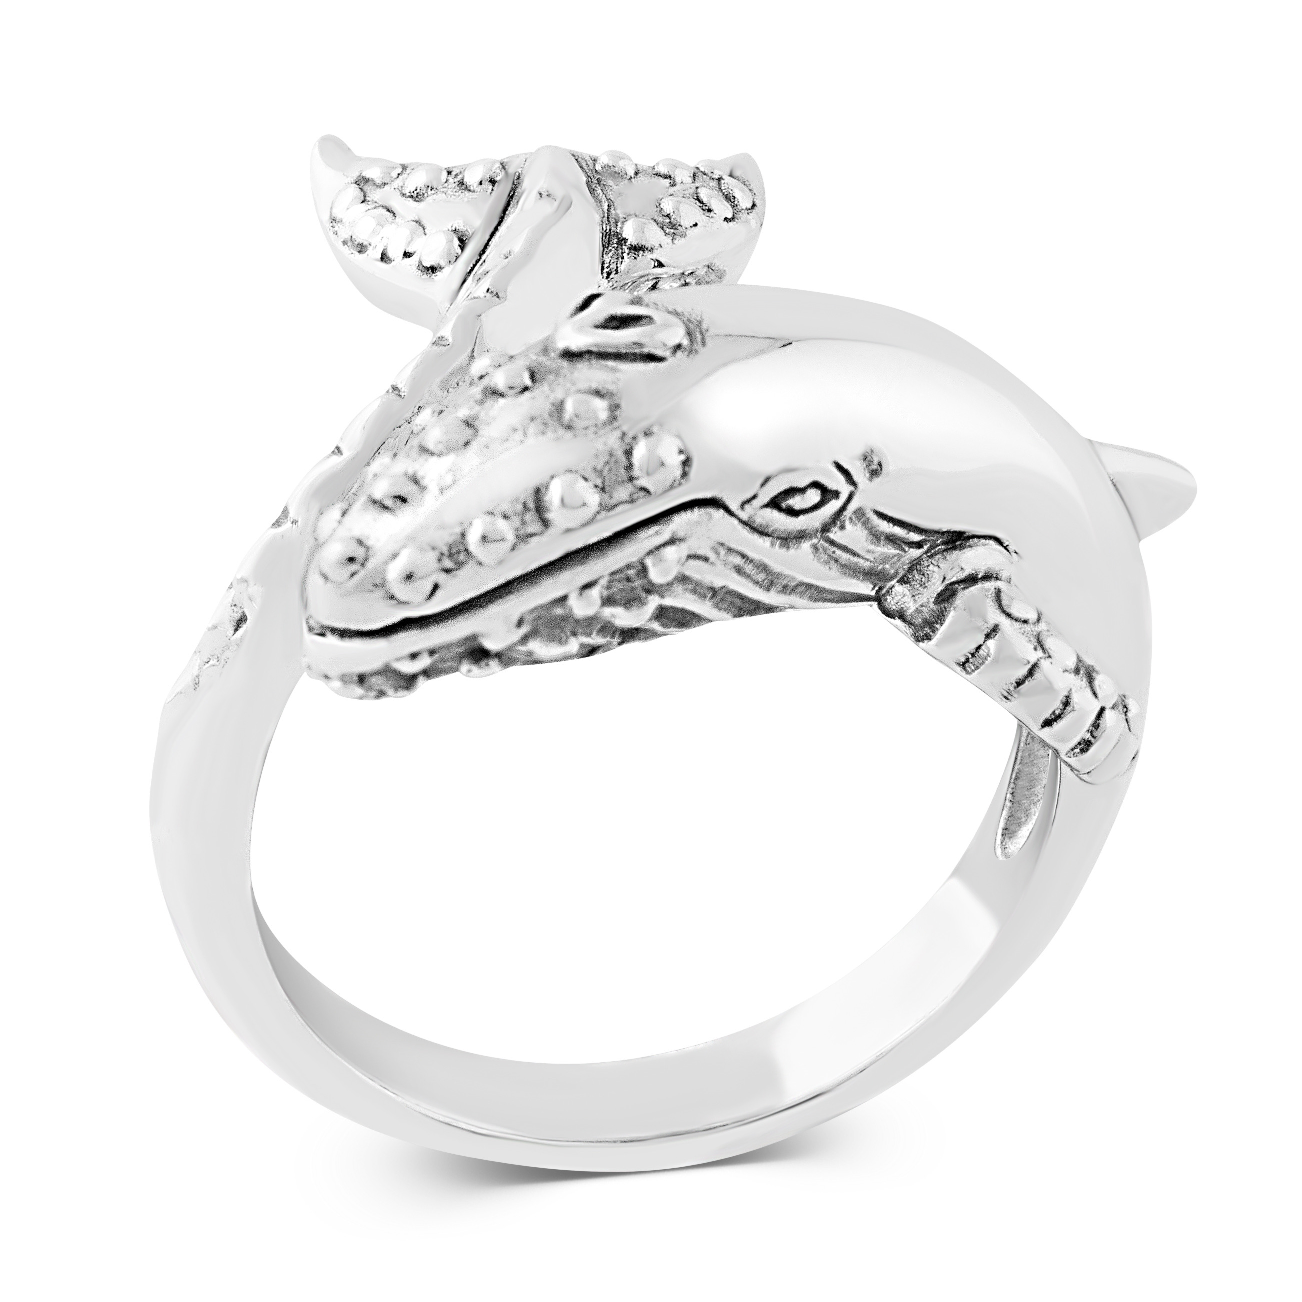 Majestic Humpback Whale Ring